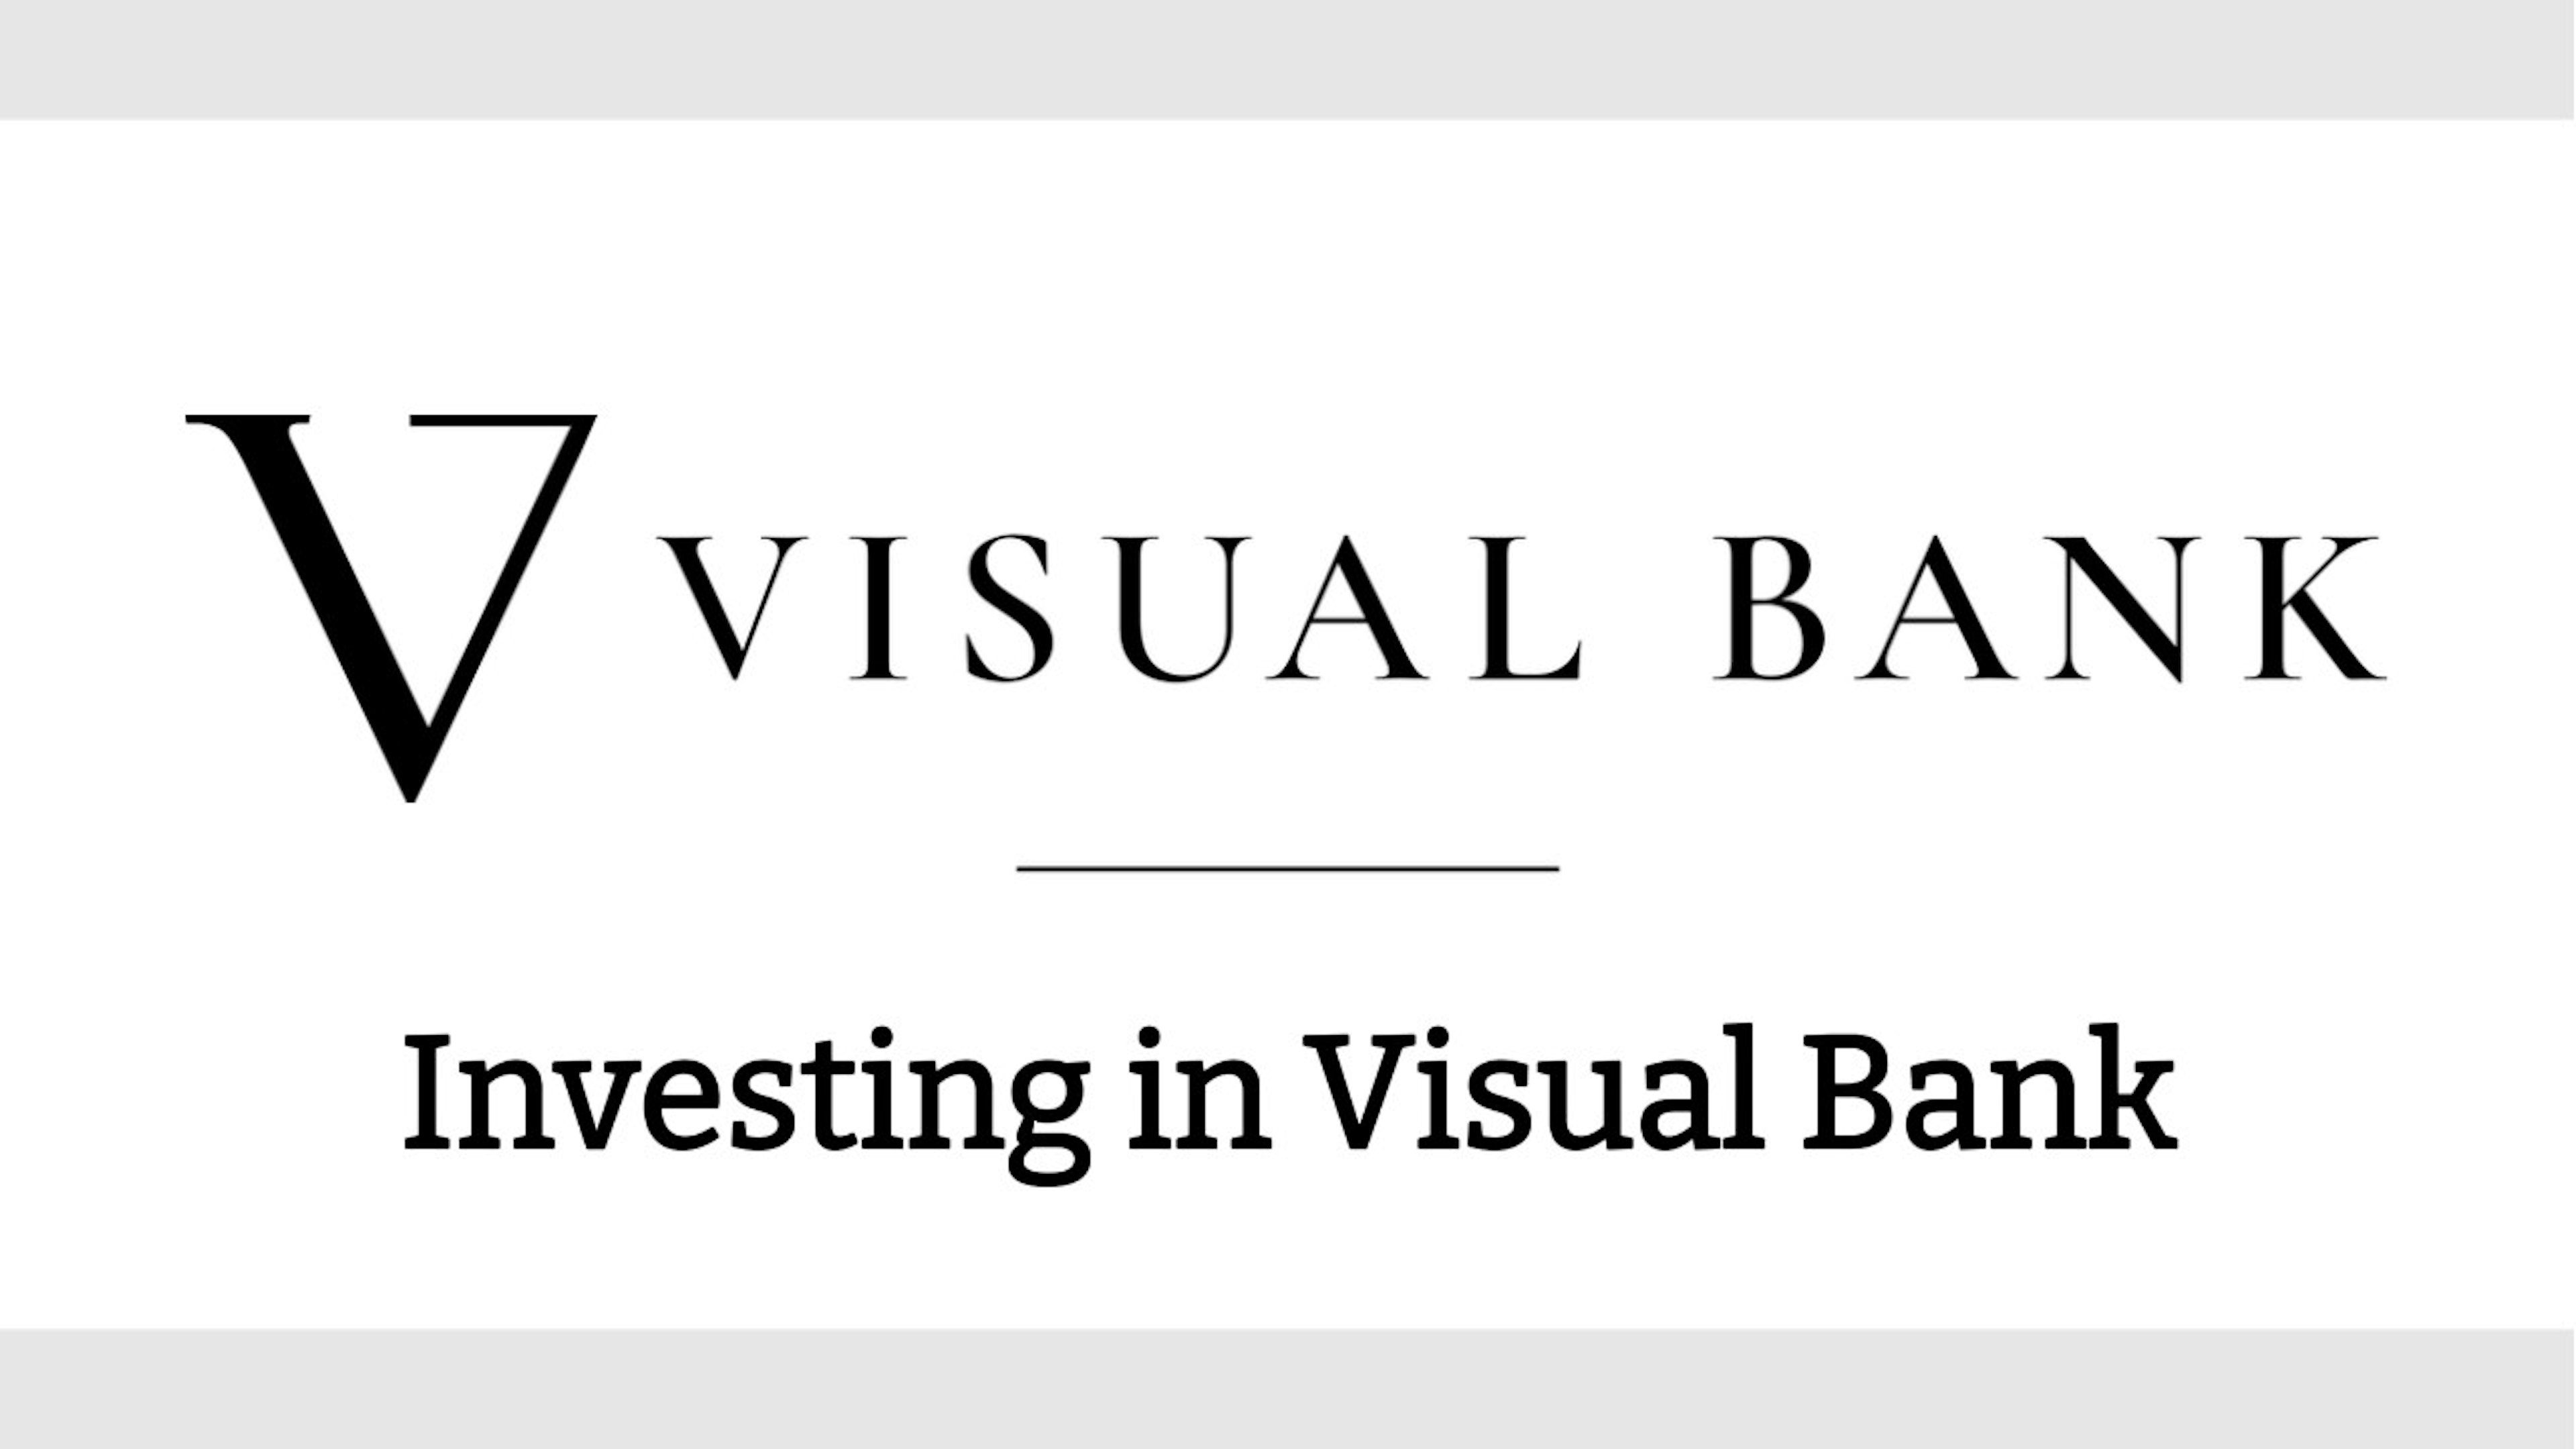 Investing in Visual Bank